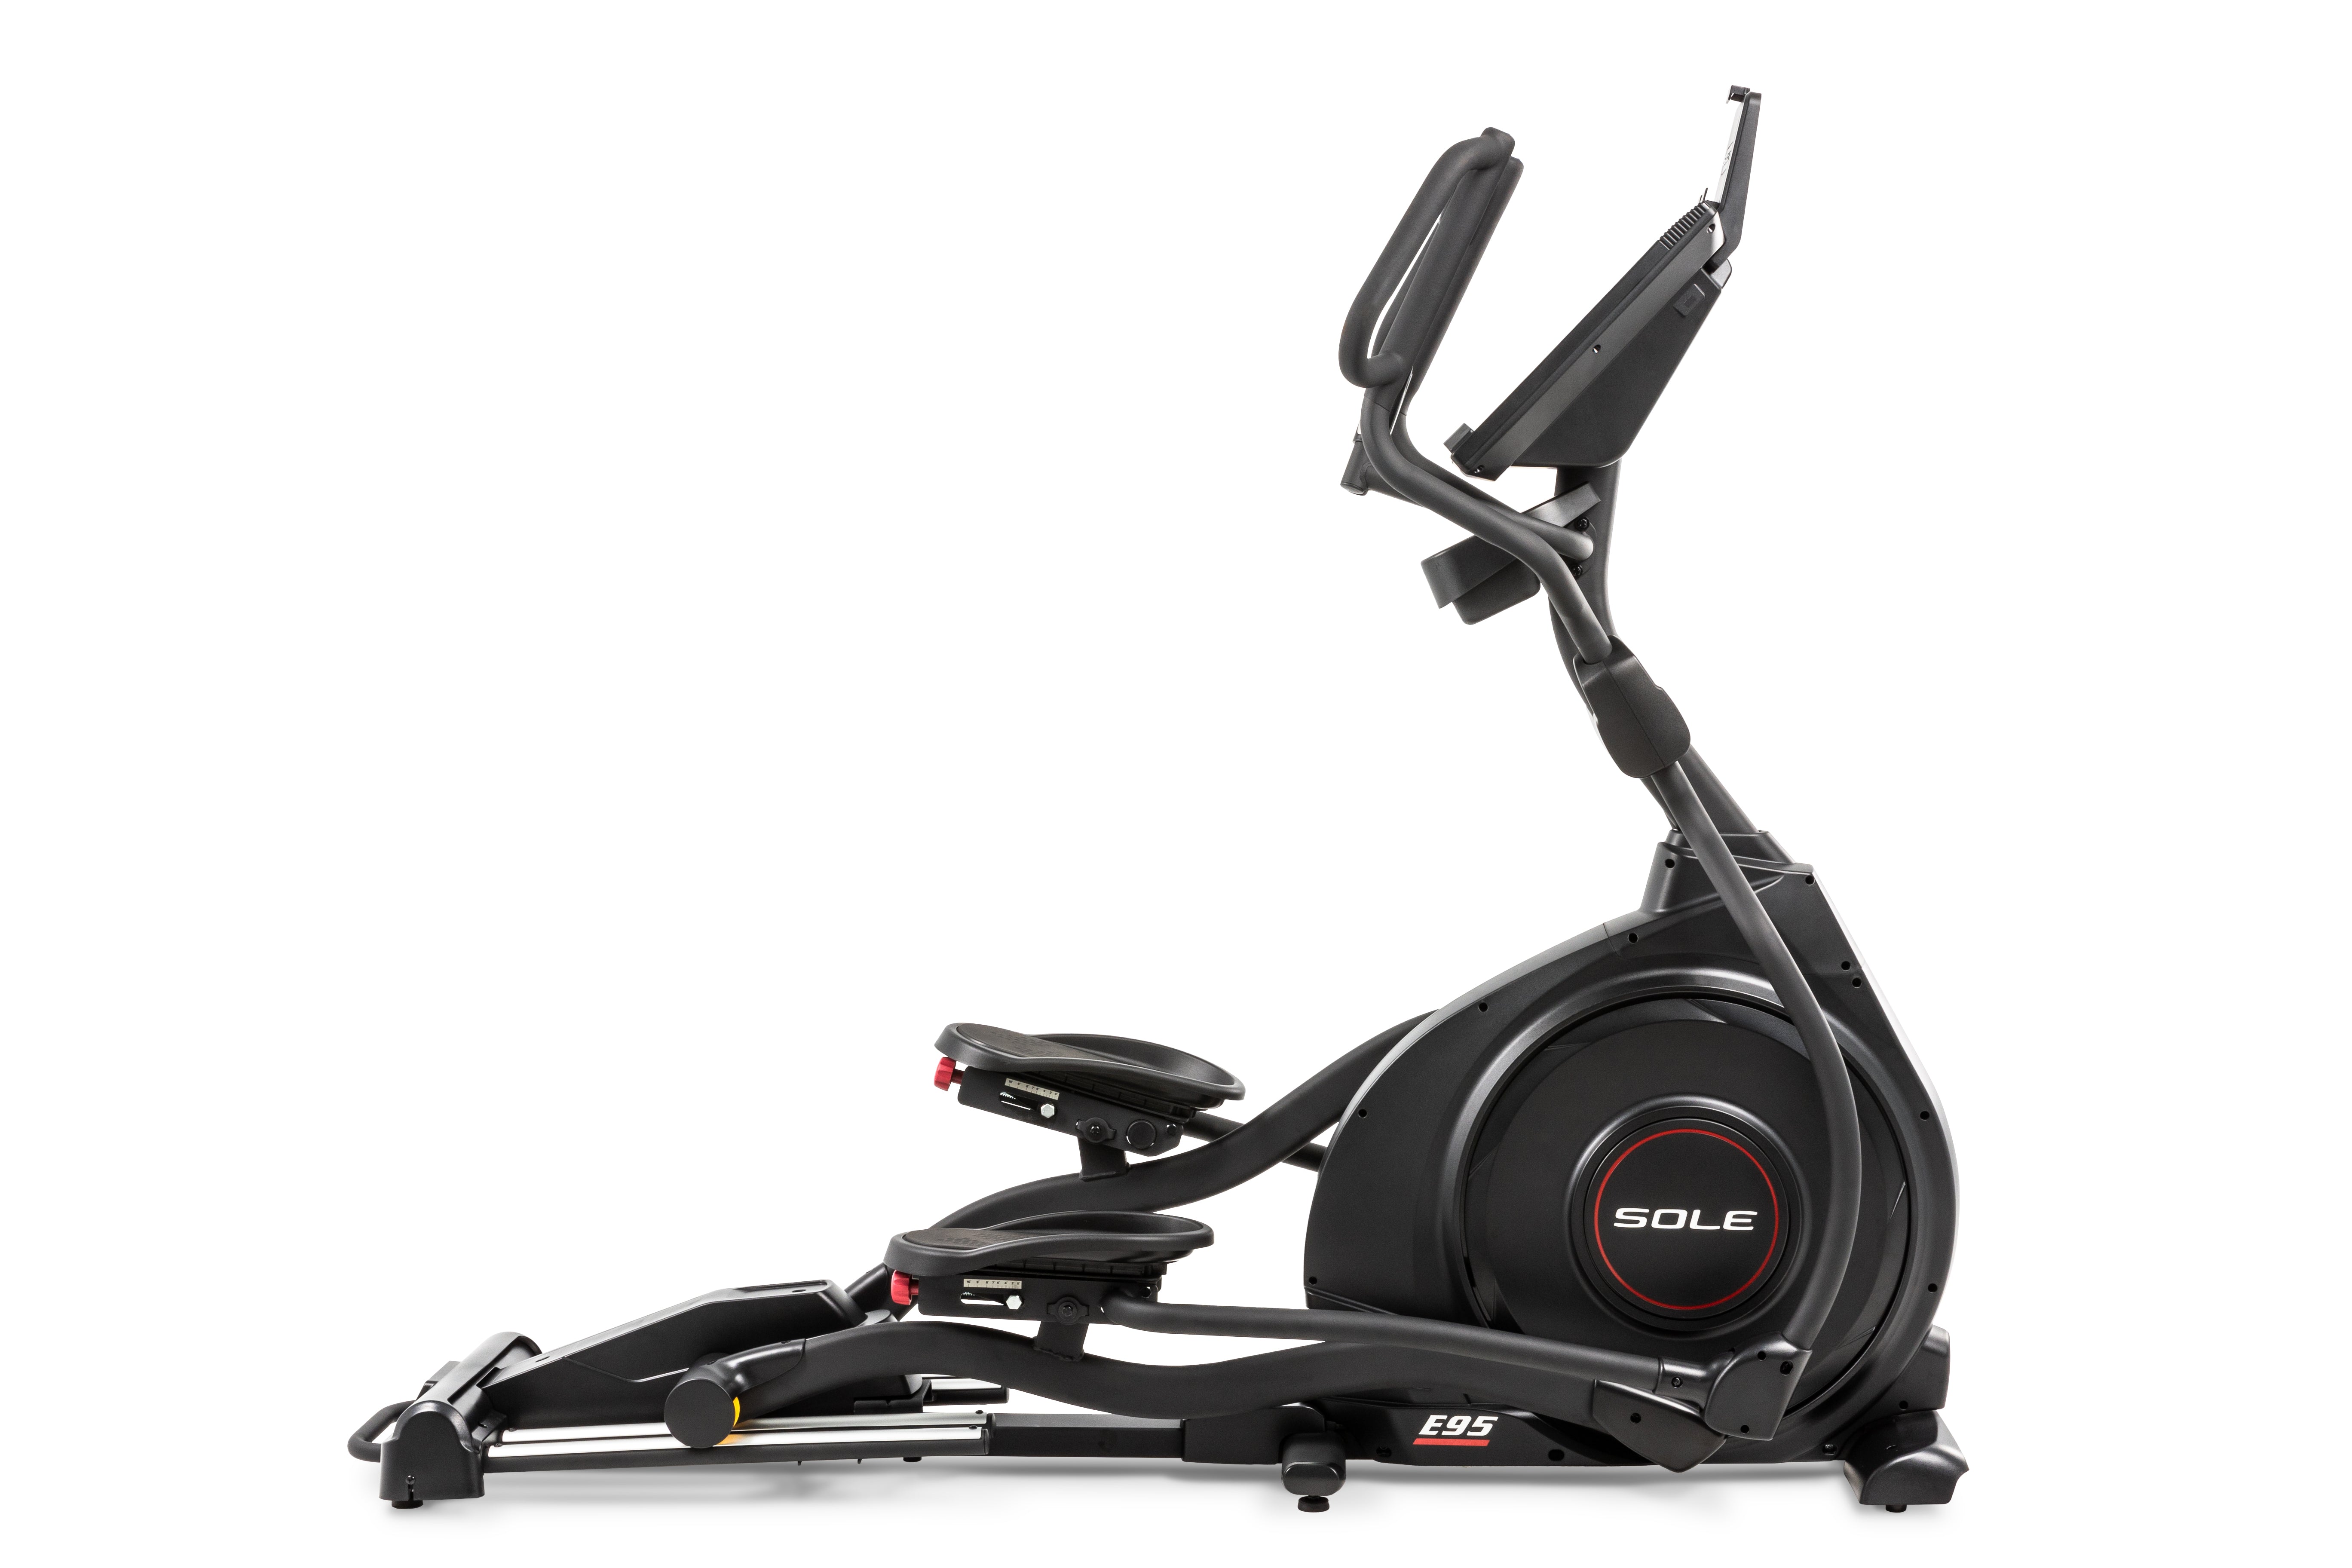 "Angled view of the Sole E95 elliptical machine, emphasizing its robust black frame. The device features a prominently displayed 'SOLE' branding on the flywheel housing, adjustable foot pedals with red adjustment dials, dual handlebars, and a streamlined console mounted at the top for displaying workout metrics.